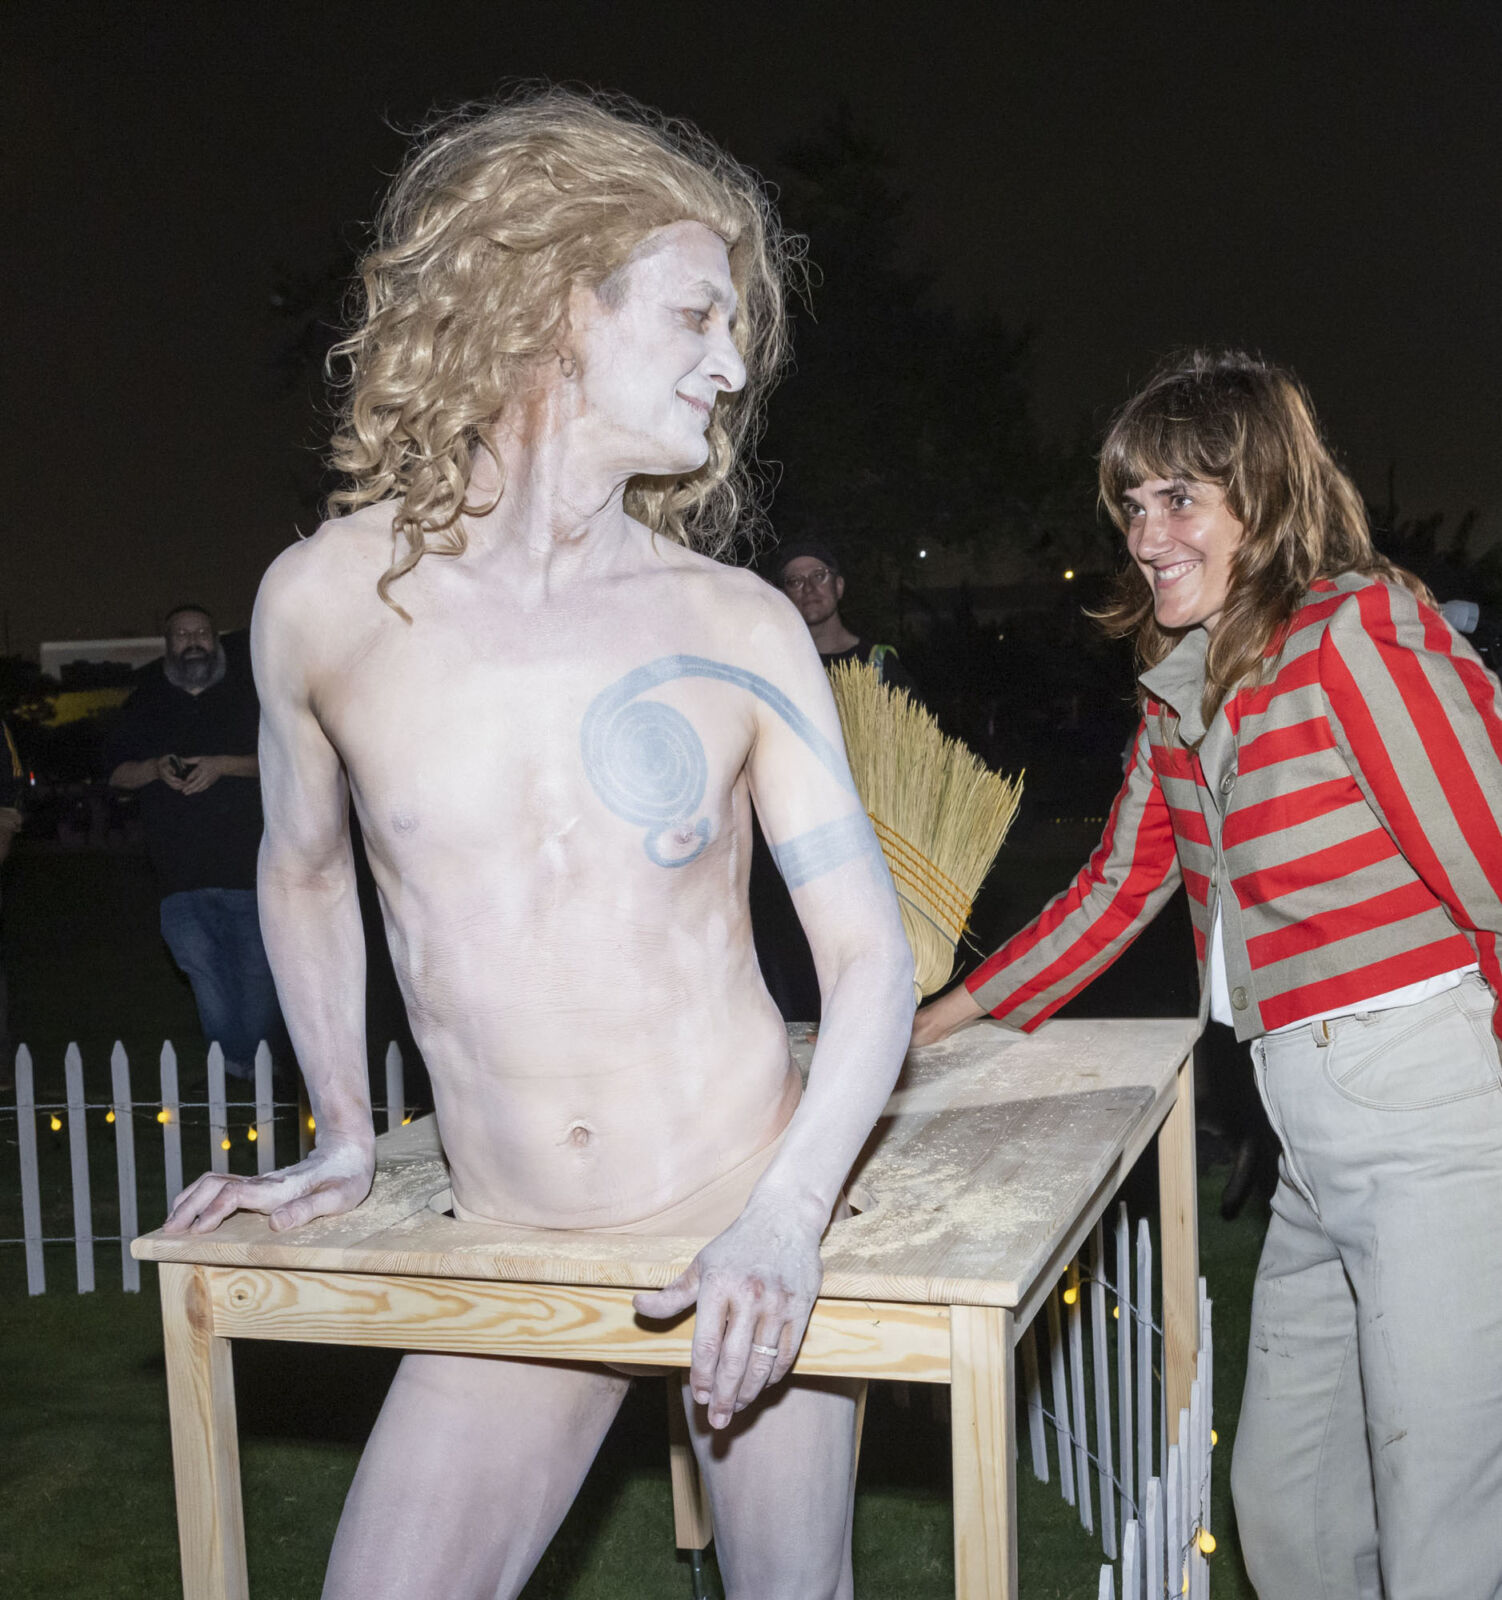 Paul Donald, mostly naked and painted in white with long blonde curly hair, wearing a table around his midsection with a broom attached looking back to an audience member who is touching the table and smiling.